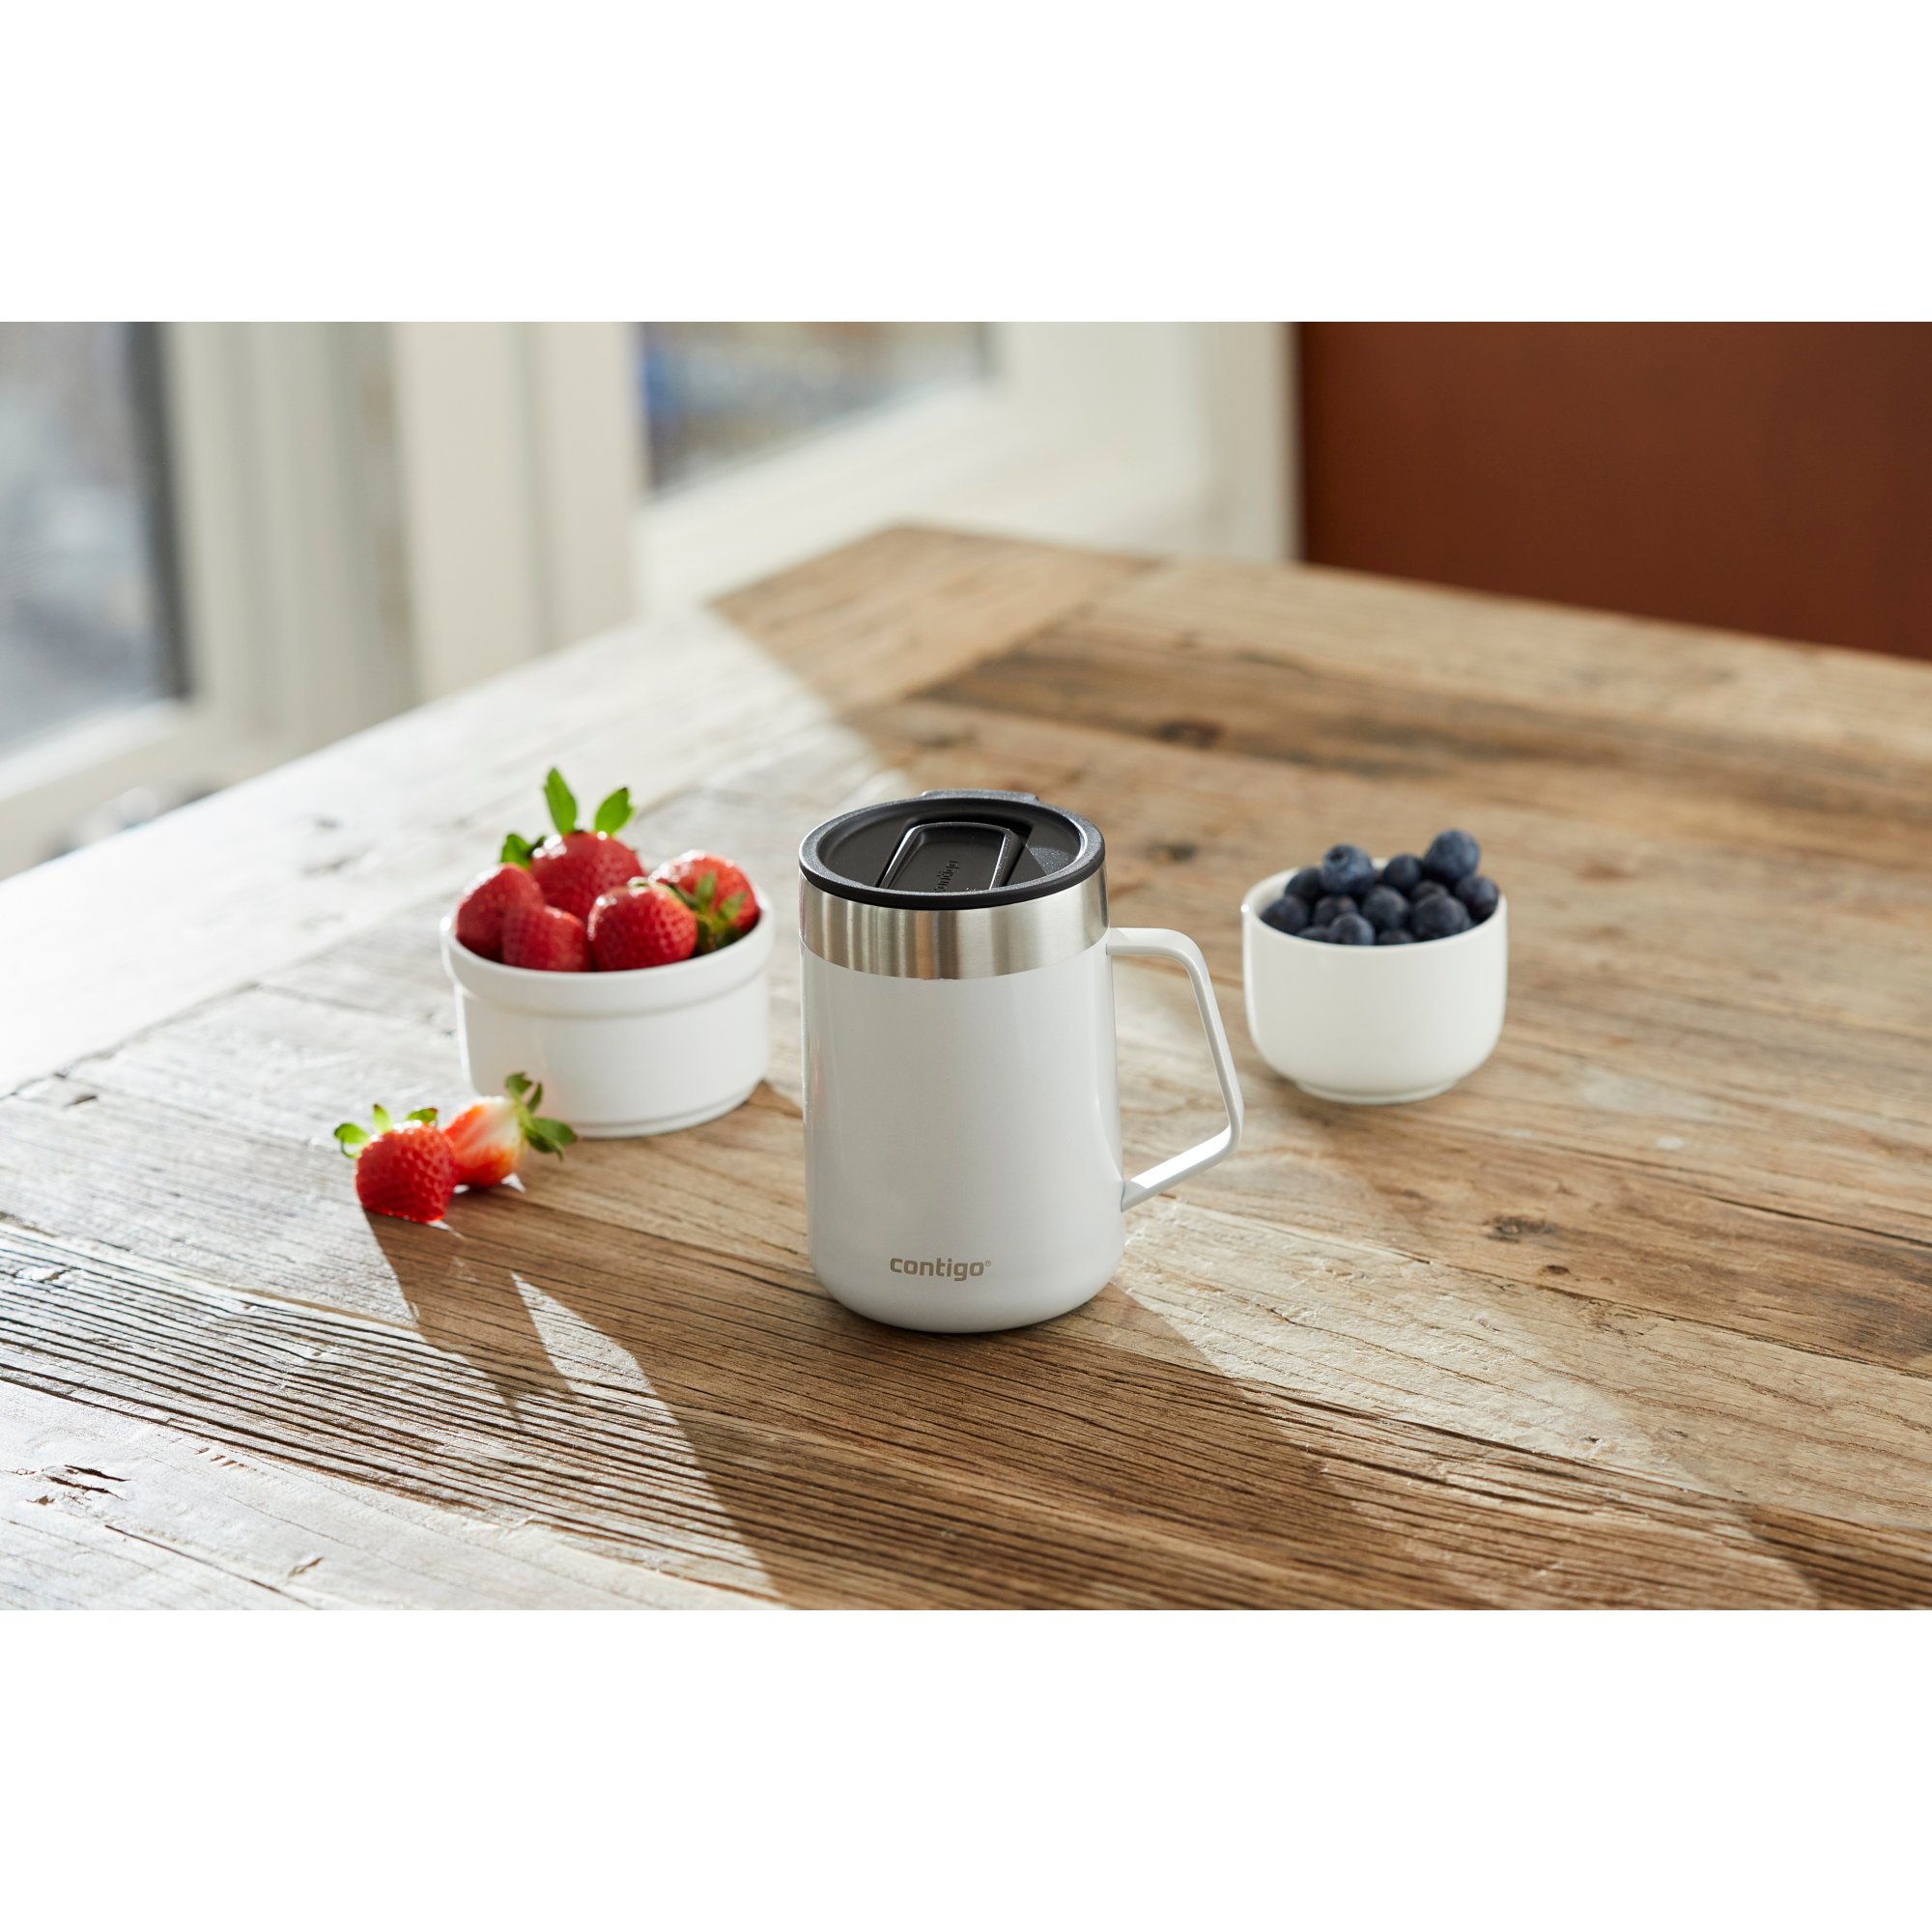 Branded Merchandise, Promotional Gifts, Corporate Clothing & Merchandise -  Biblio Products Ltd. CONTIGO® STREETERVILLE DESK MUG 420 ML THERMO CUP